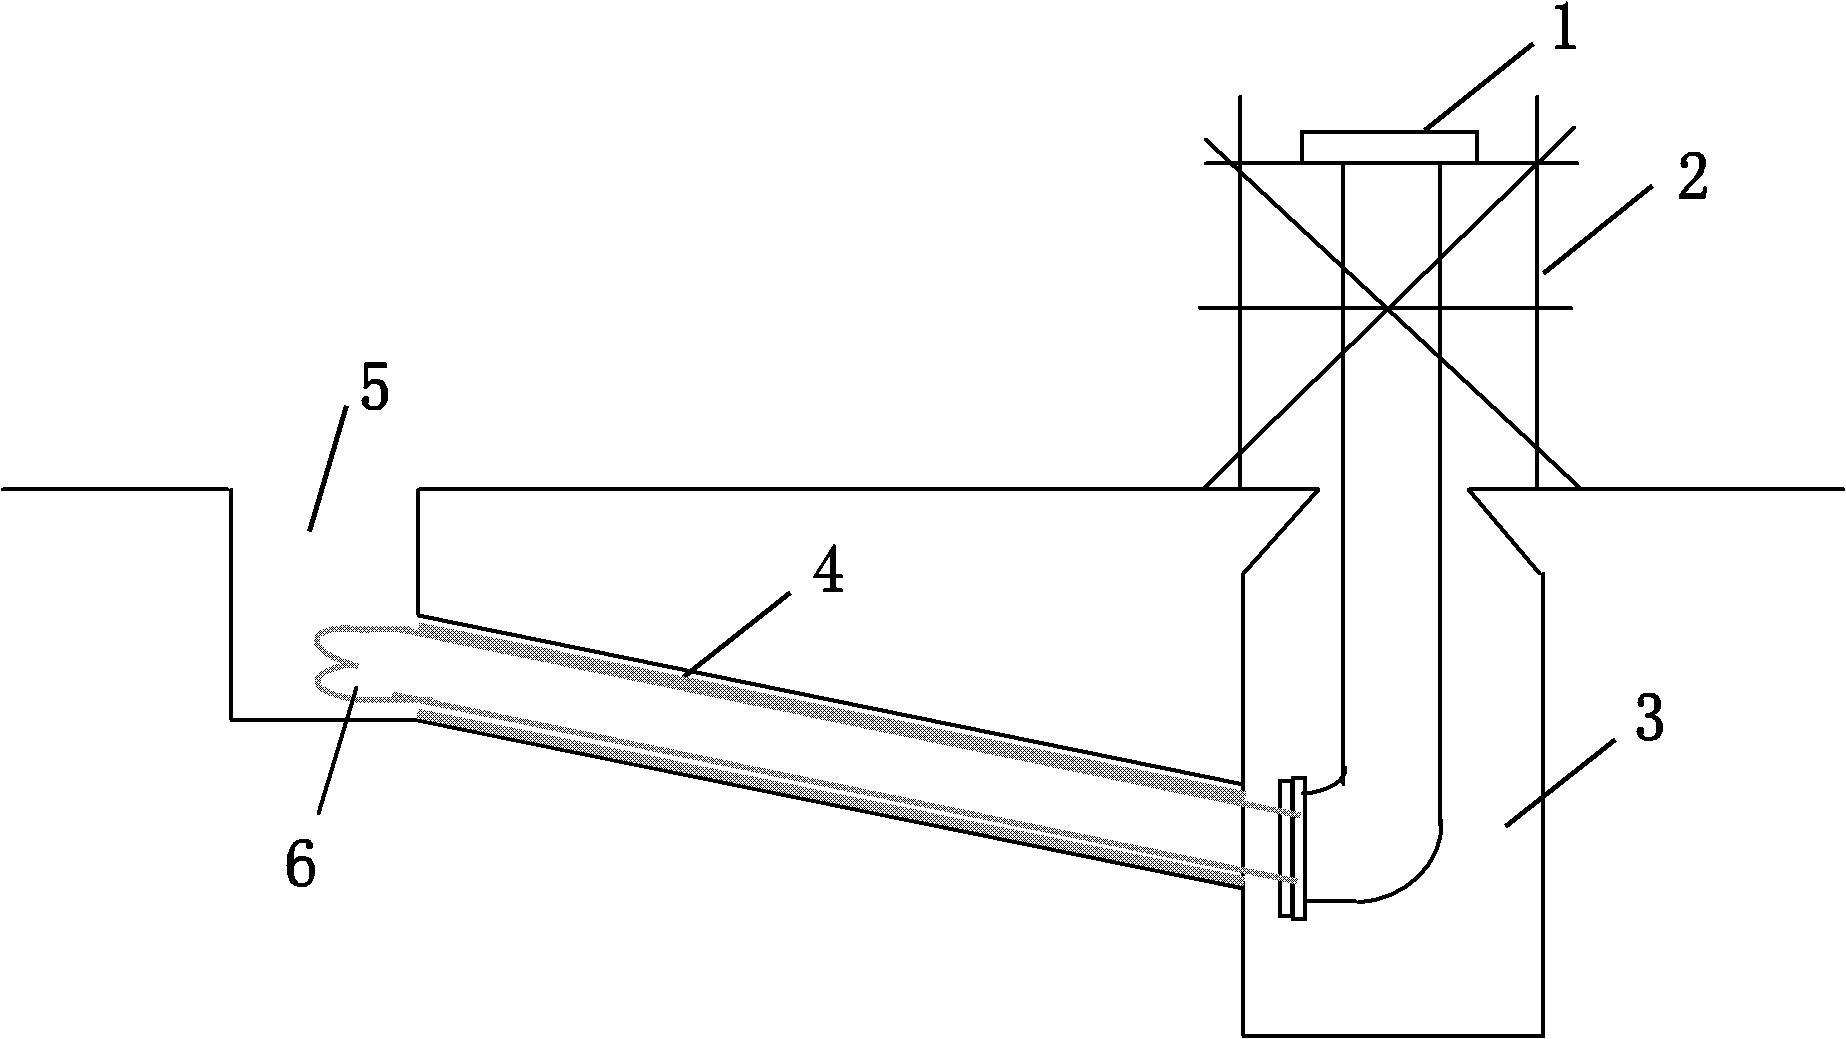 A non-excavation lining repair method for the repair of drainage branch pipes under urban roads